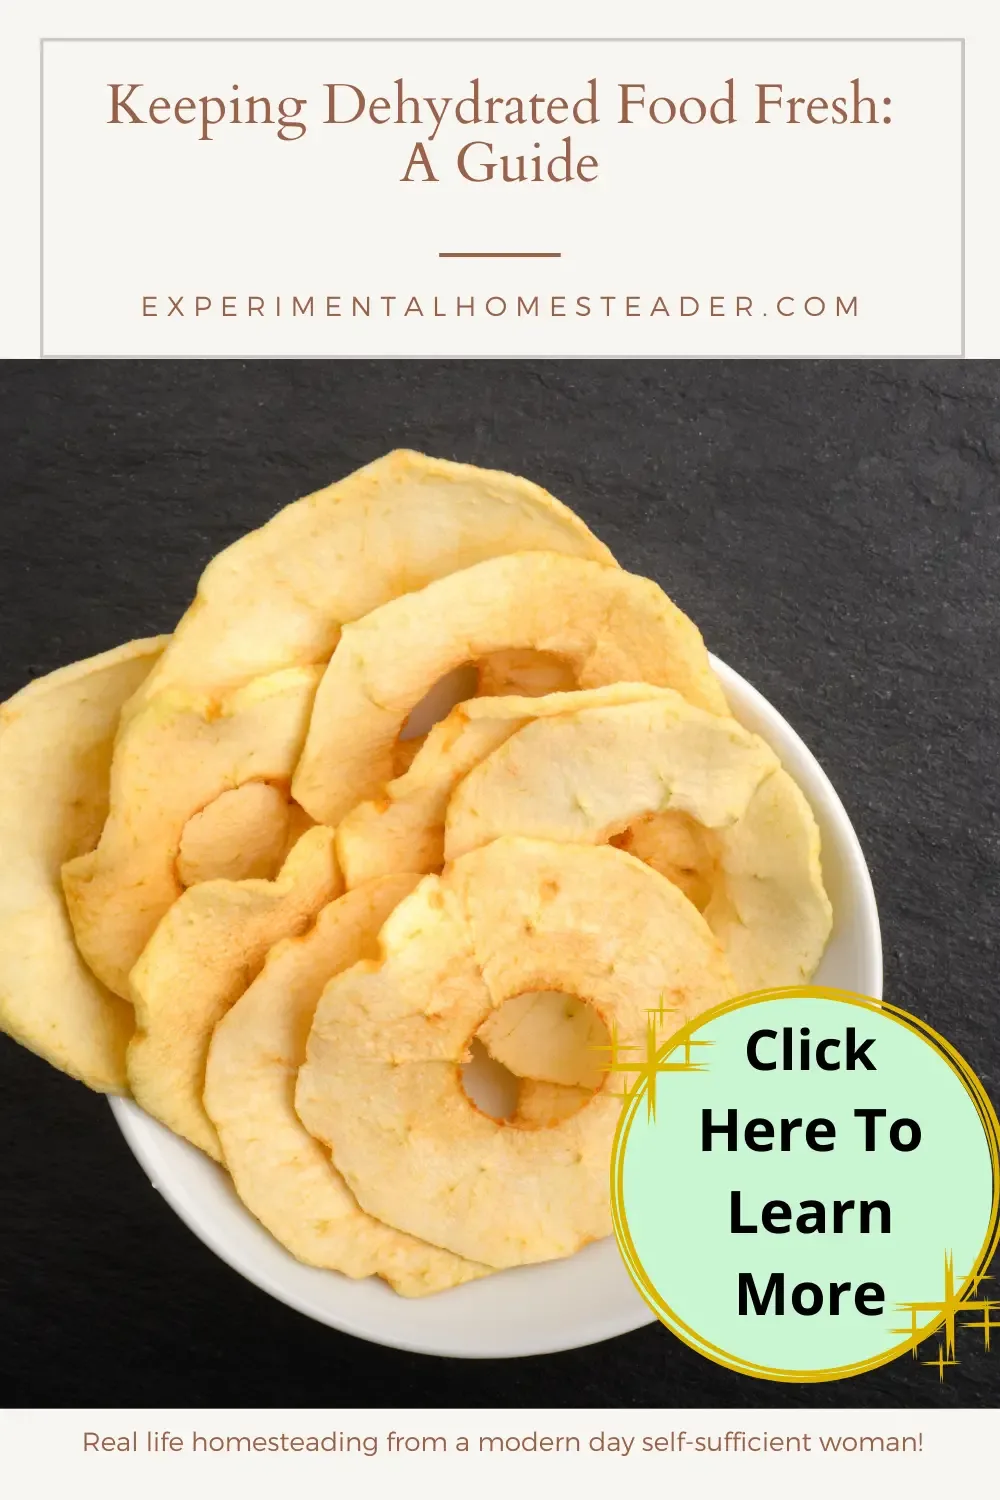 Dehydrated apple rings in a bowl on a countertop.